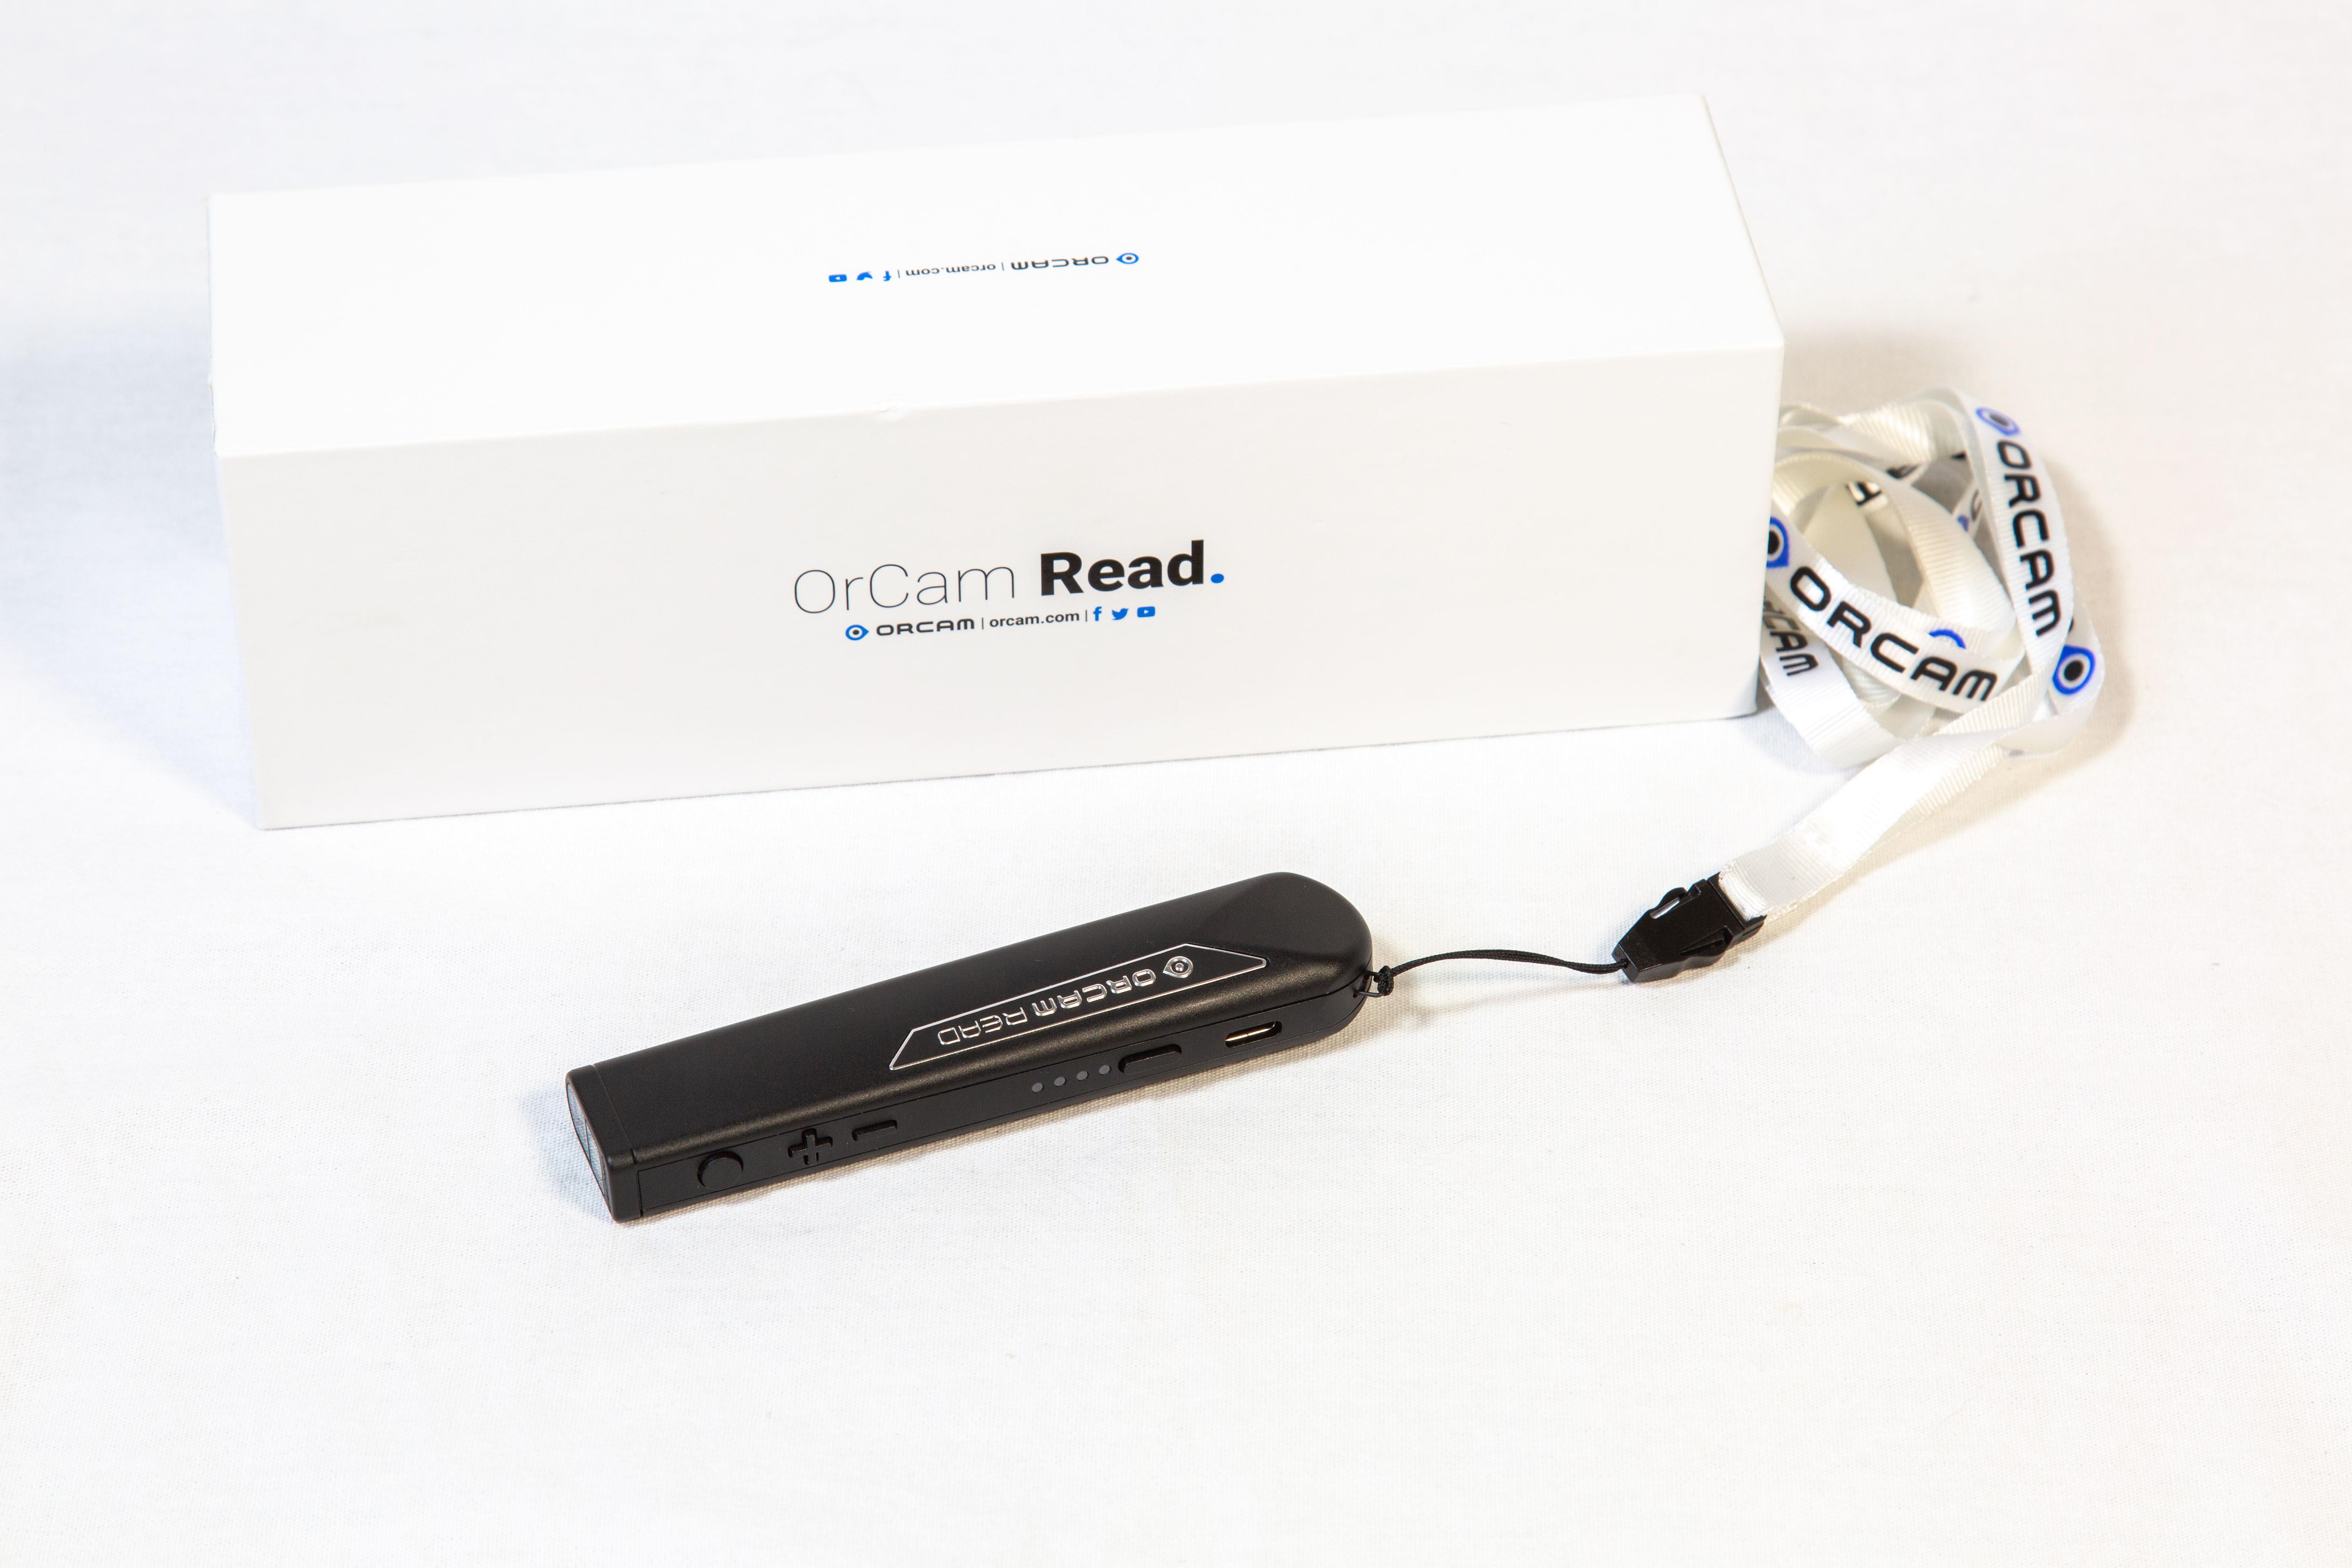 OrCam Read shown next to its box